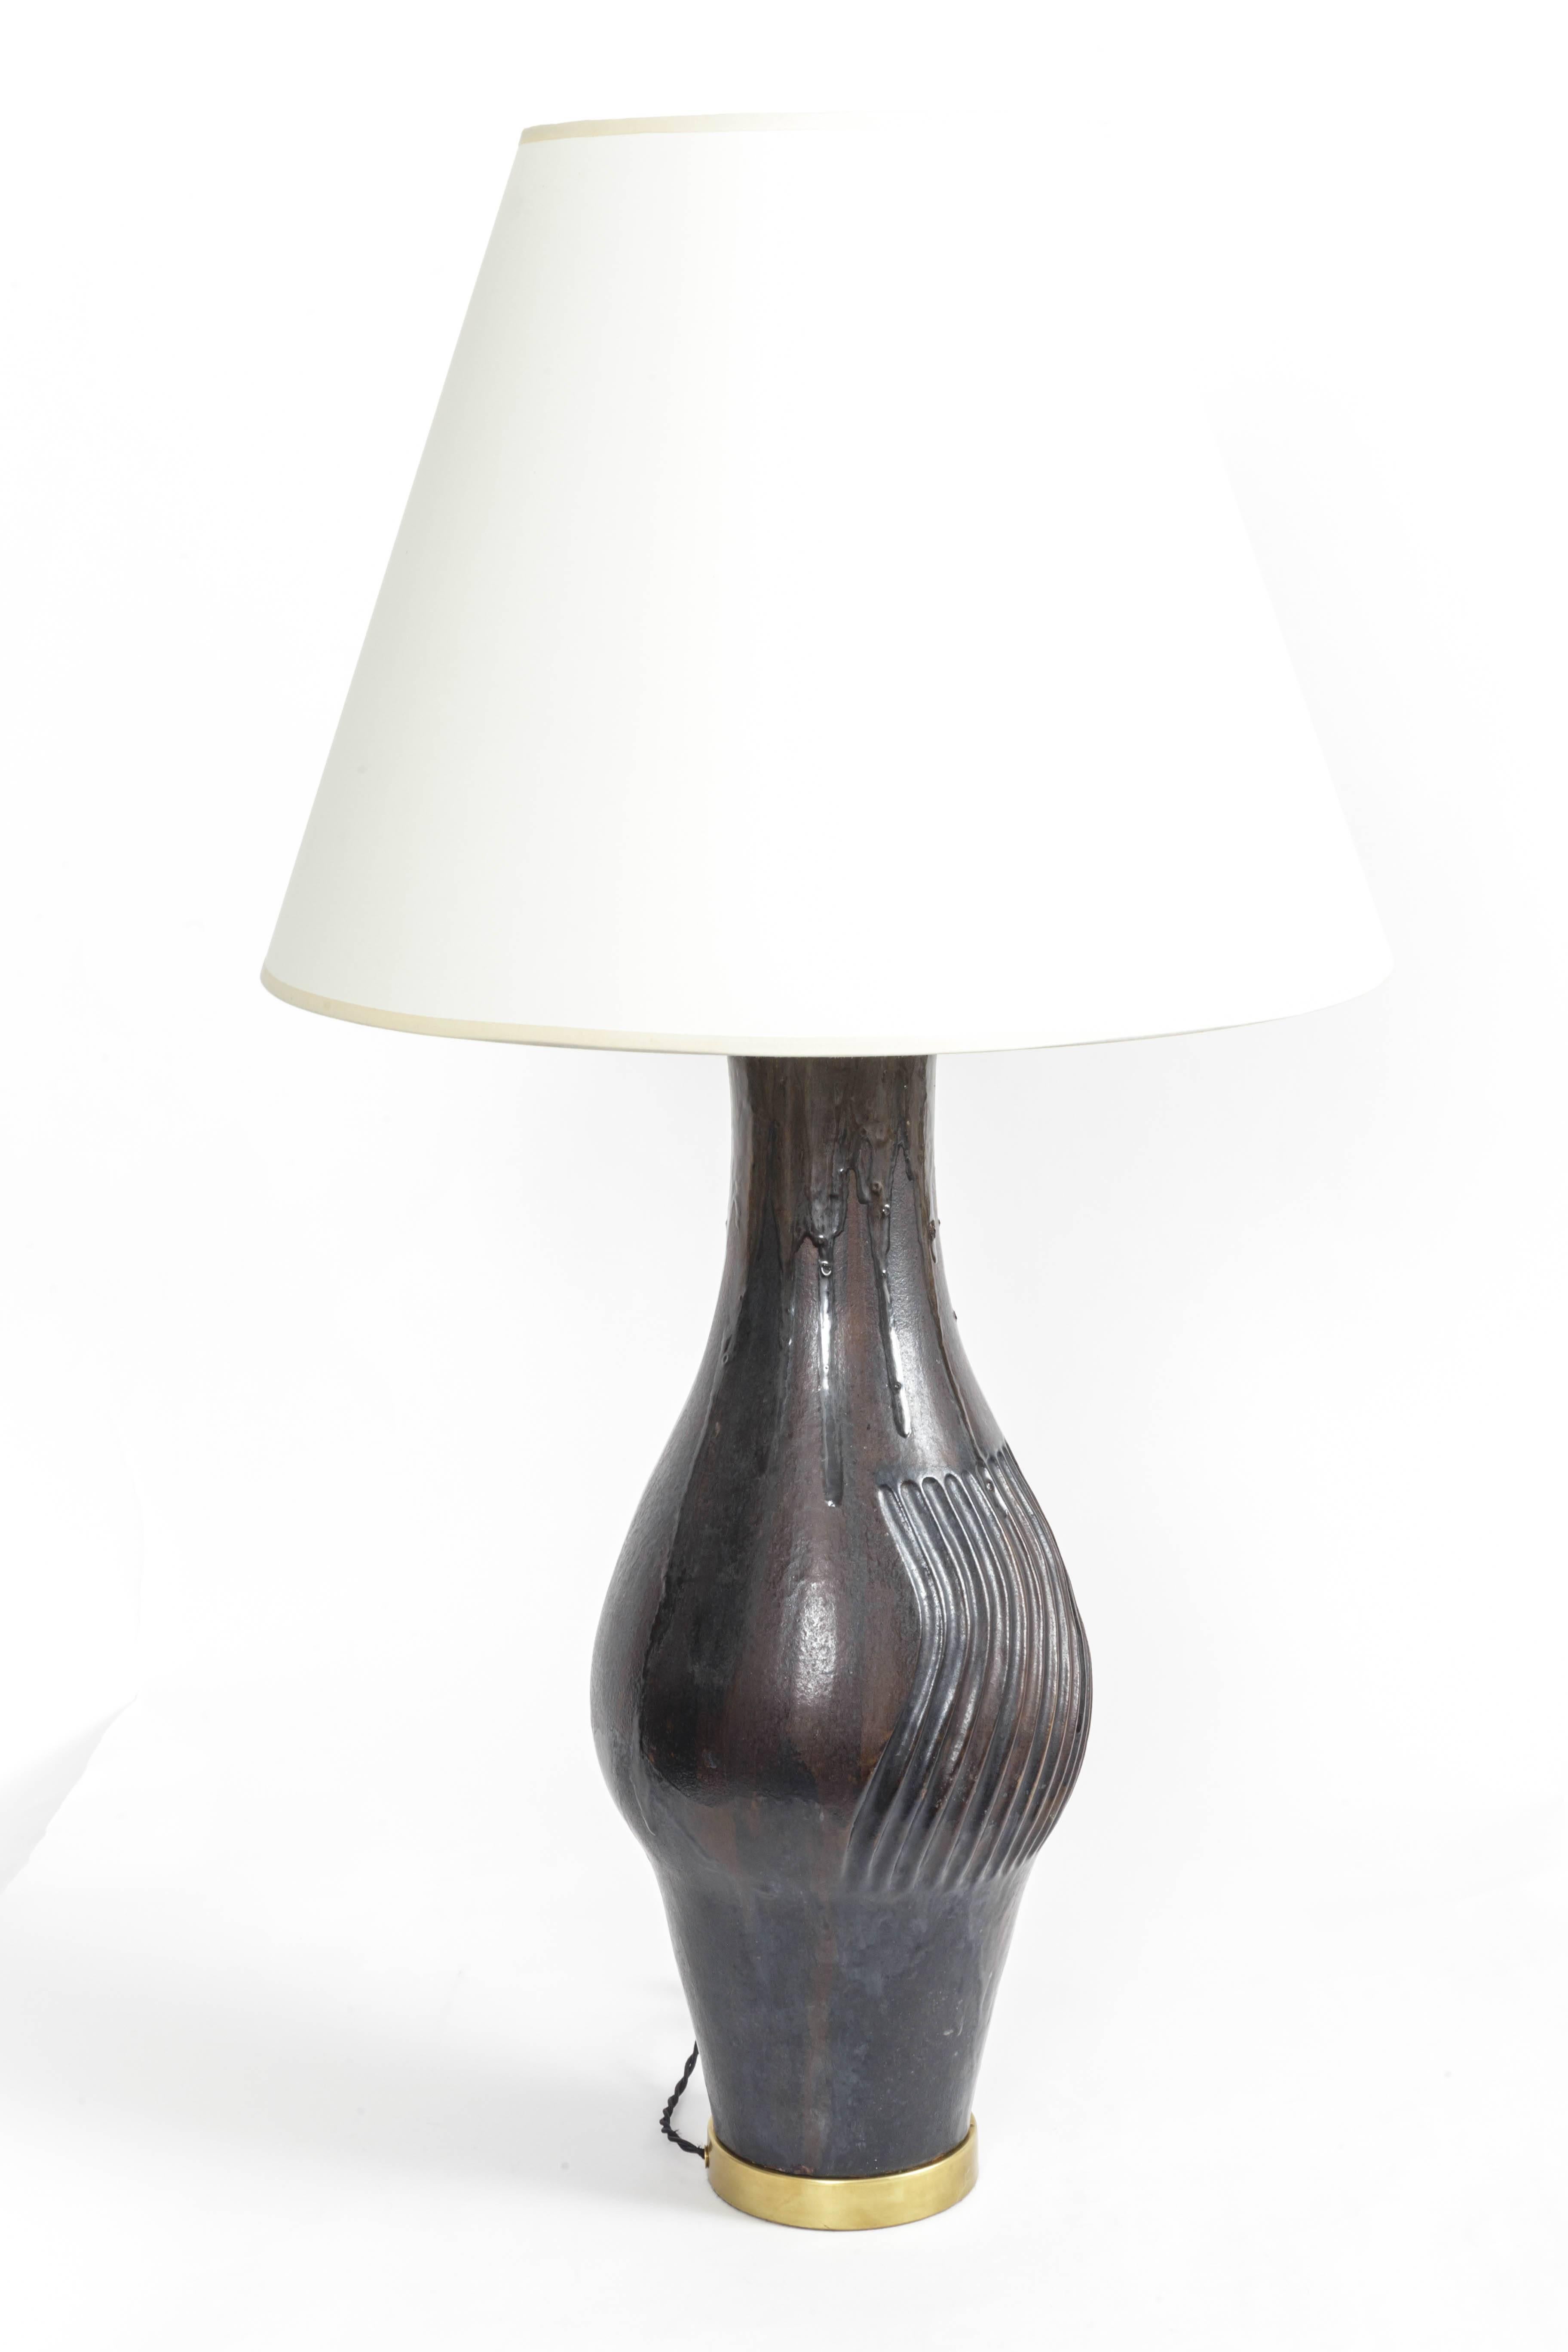 Large Ceramic and Brass Table Lamp by Marcello Fantoni, Italy, 1958 For Sale 1